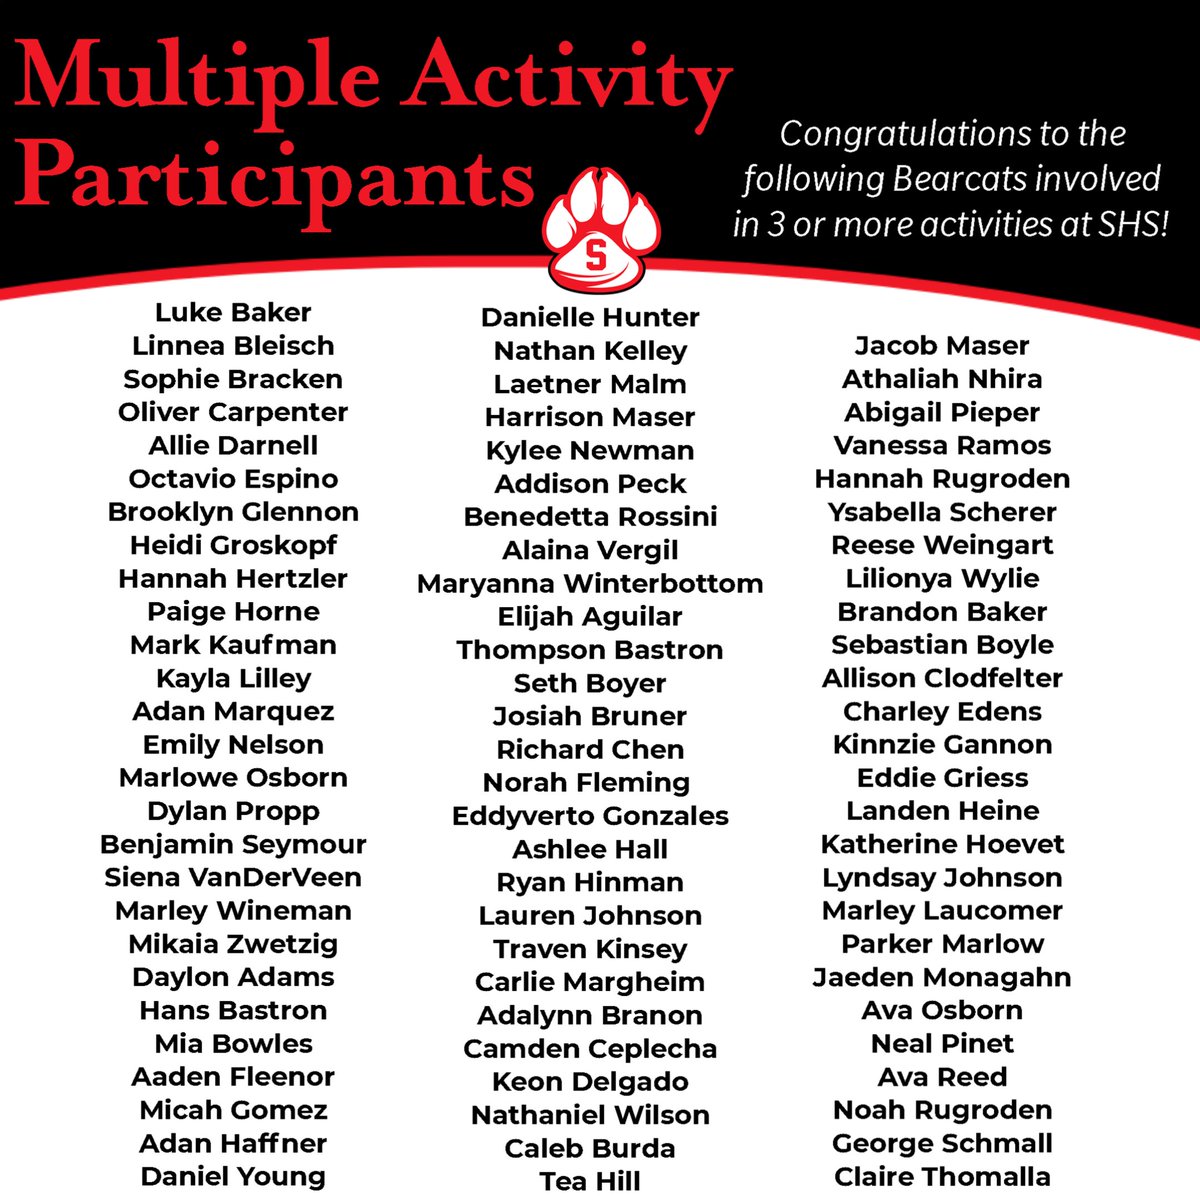 Congrats to this list of SHS students who participated in three or more NSAA activities during the 2023-2024 school year! They will be recognized and awarded a certificate of achievement by the NSAA and the Nebraska State Colleges! #BearcatStrong #NSAA #MultiActivity